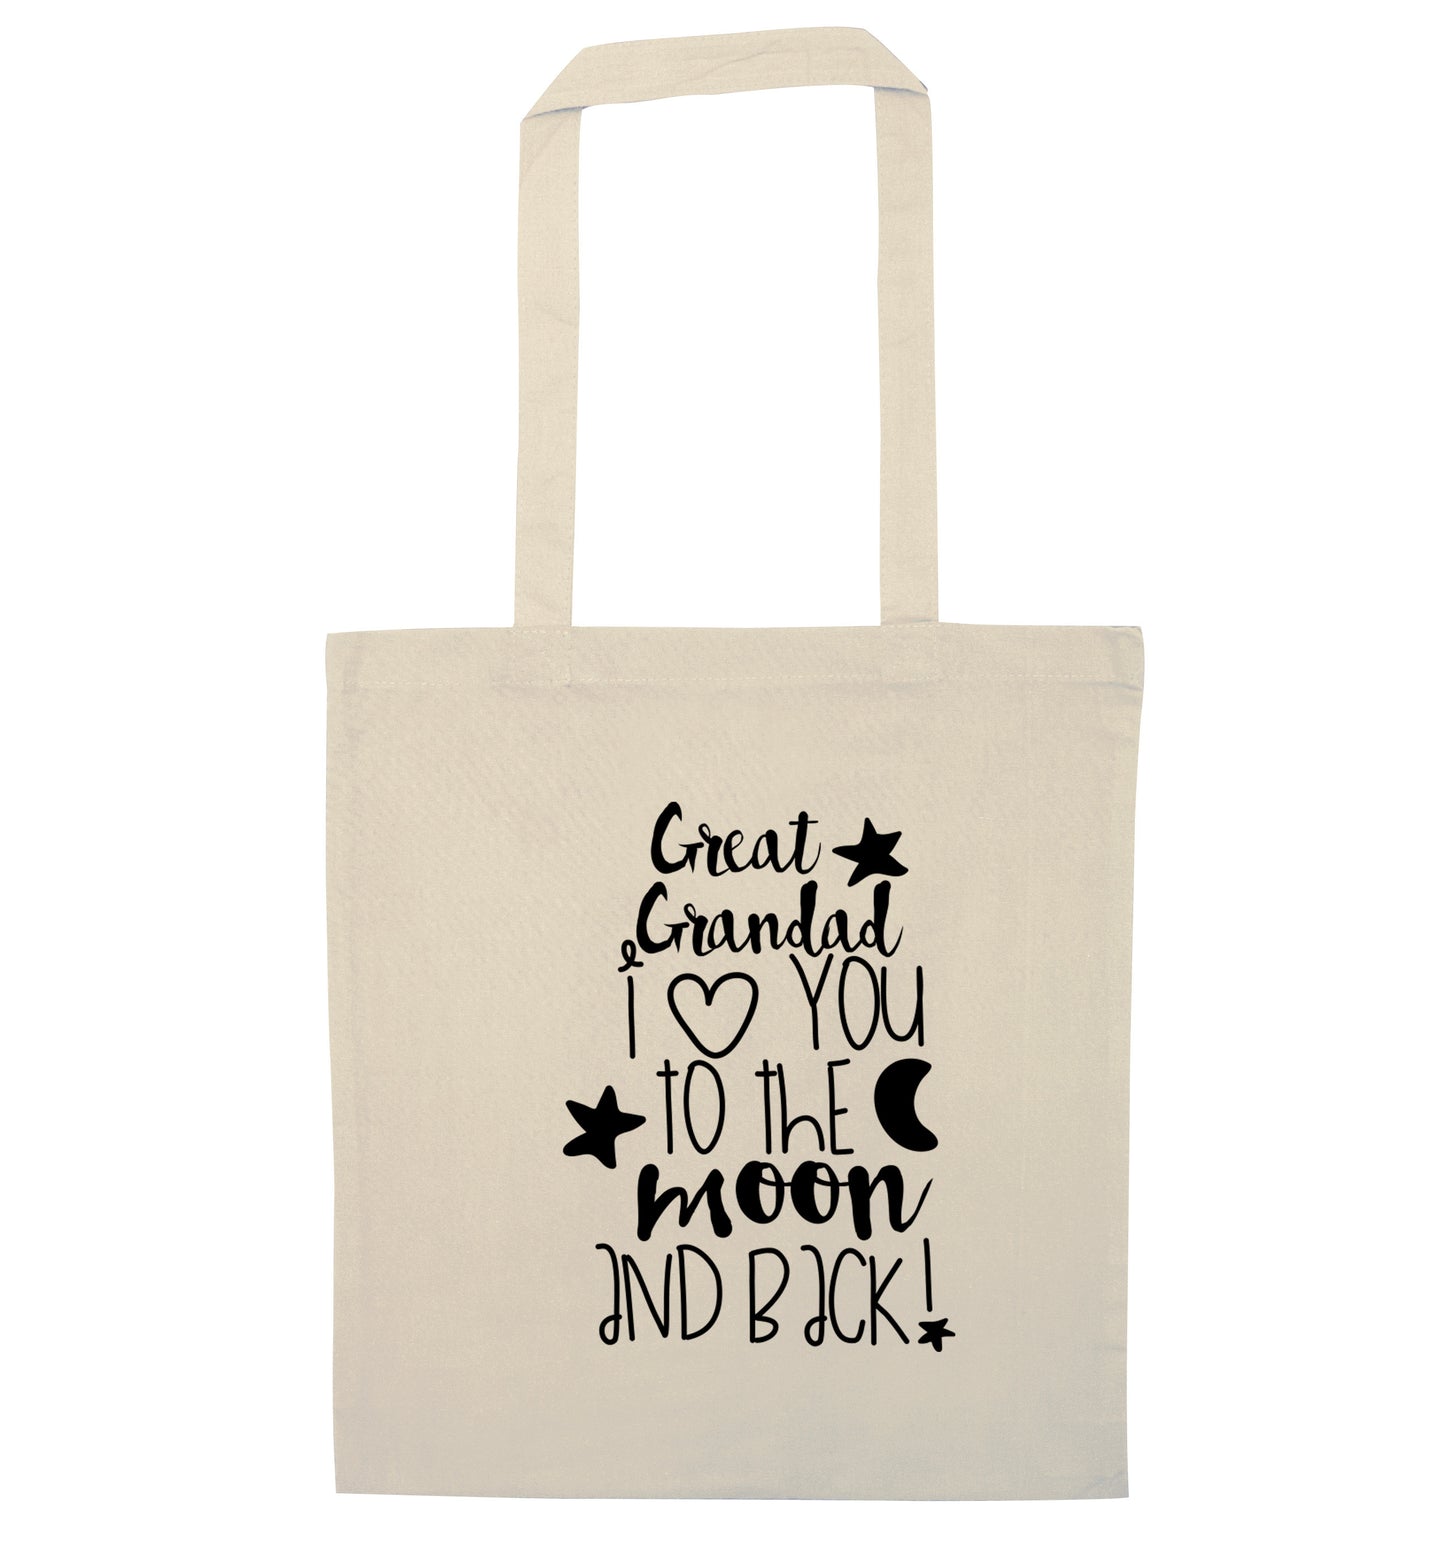 Great Grandad I love you to the moon and back natural tote bag